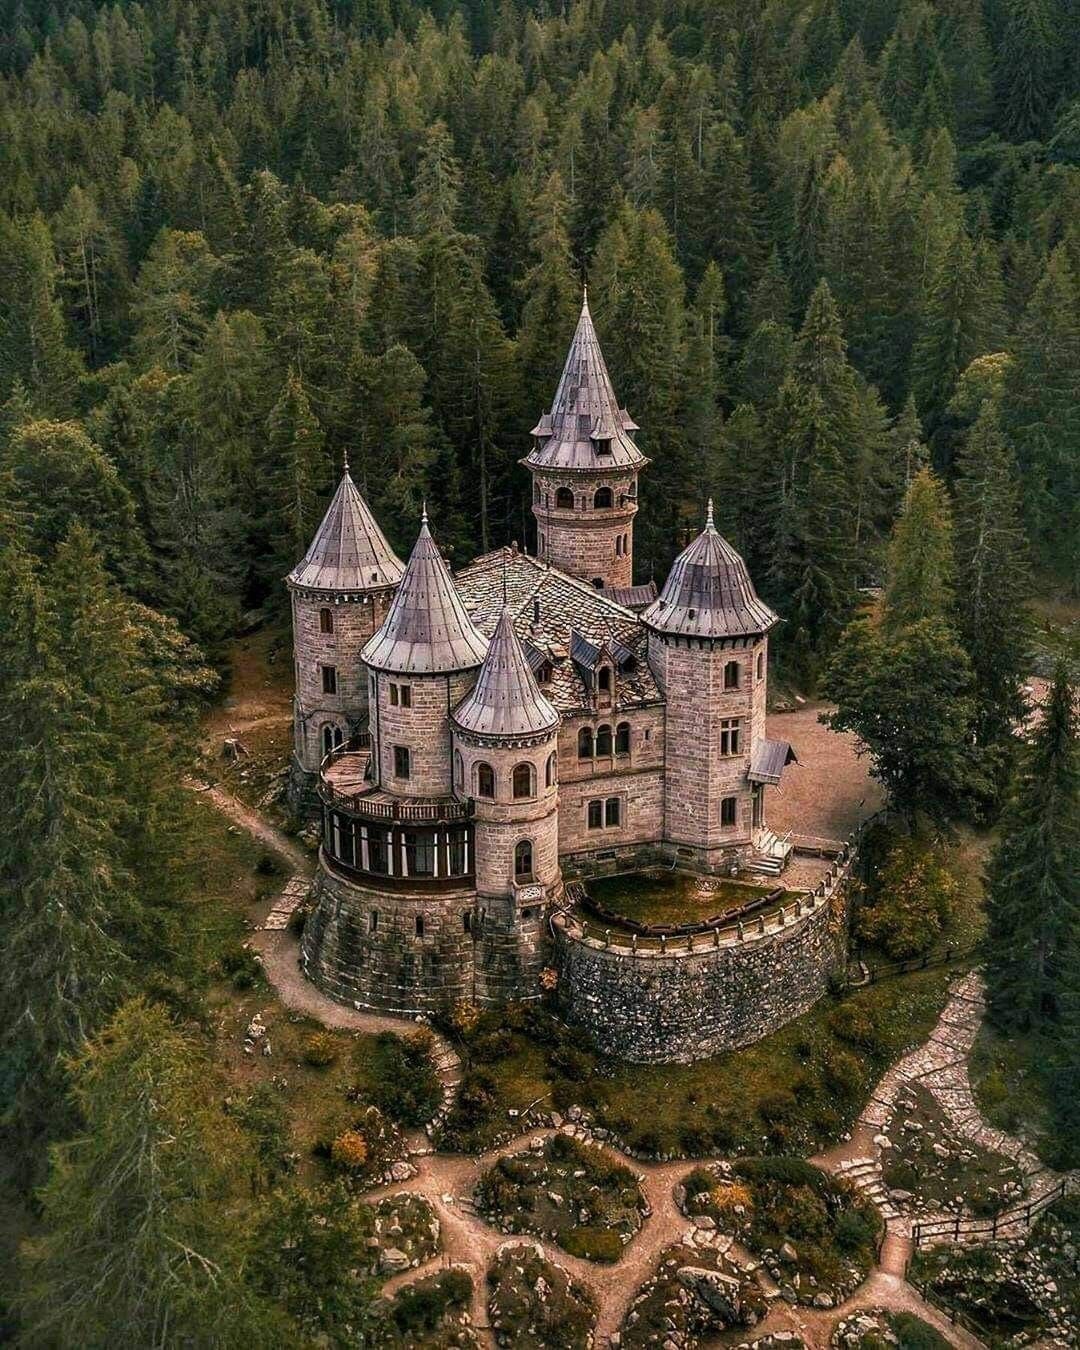 Castle of Queen Margherita of Savoy - Gressoney-Saint-Jean, Italy - Designed in an eclectic style flanked by 5 Neo-Gothic towers of different heights, one octagonal by architect Emilio Stramucci in 1899 - Open to the Public